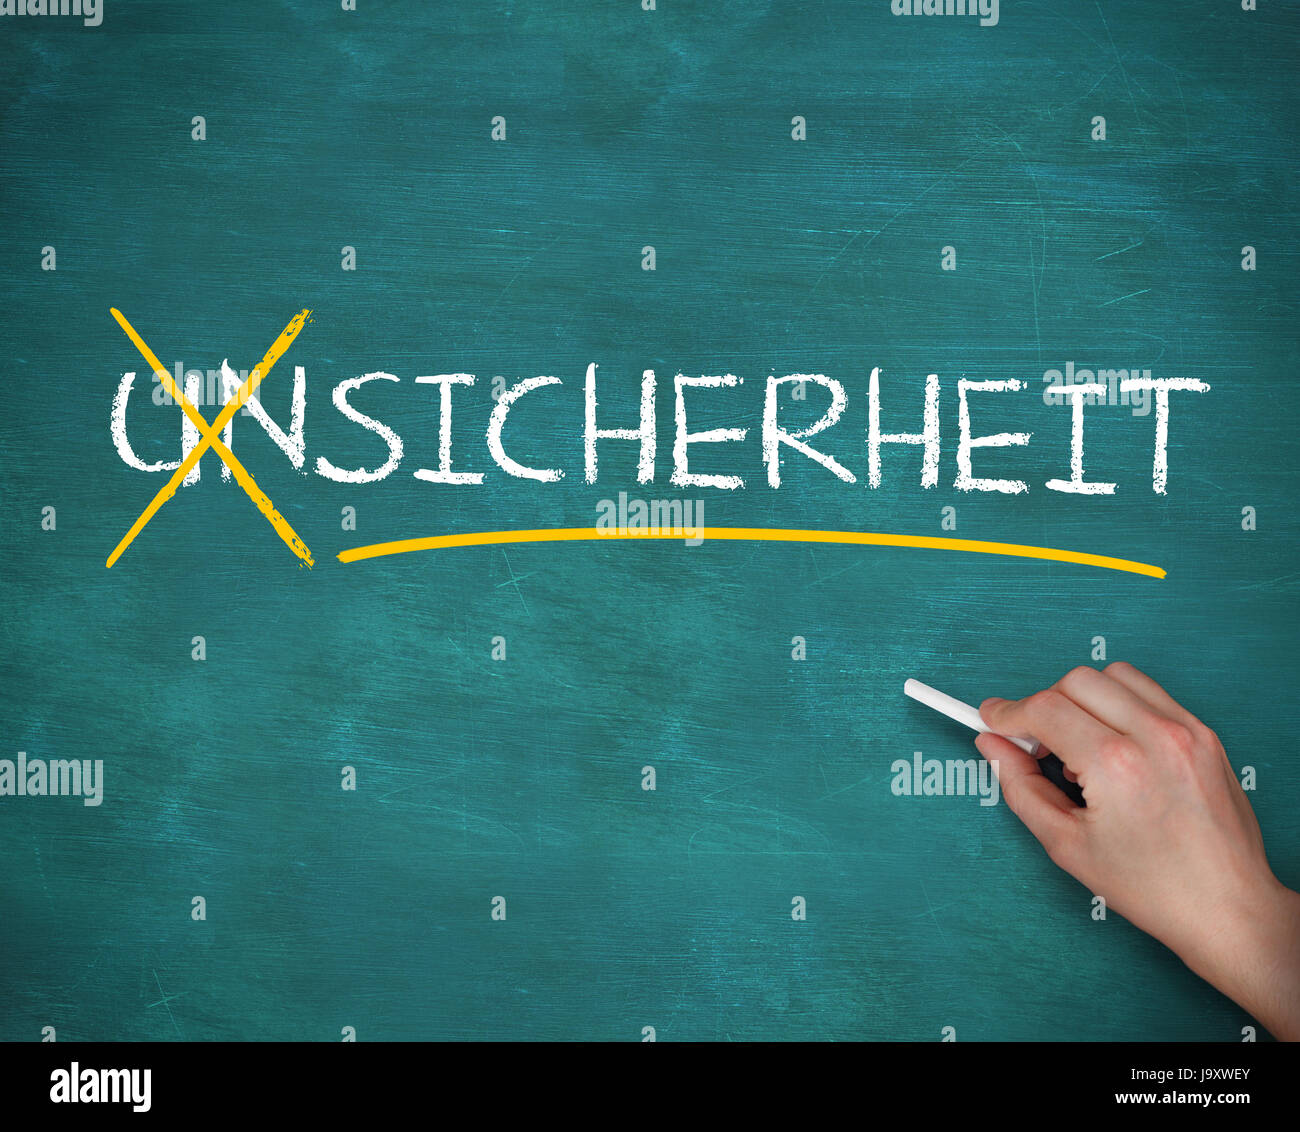 Hand crossing out unsicherheit on a green board Stock Photo